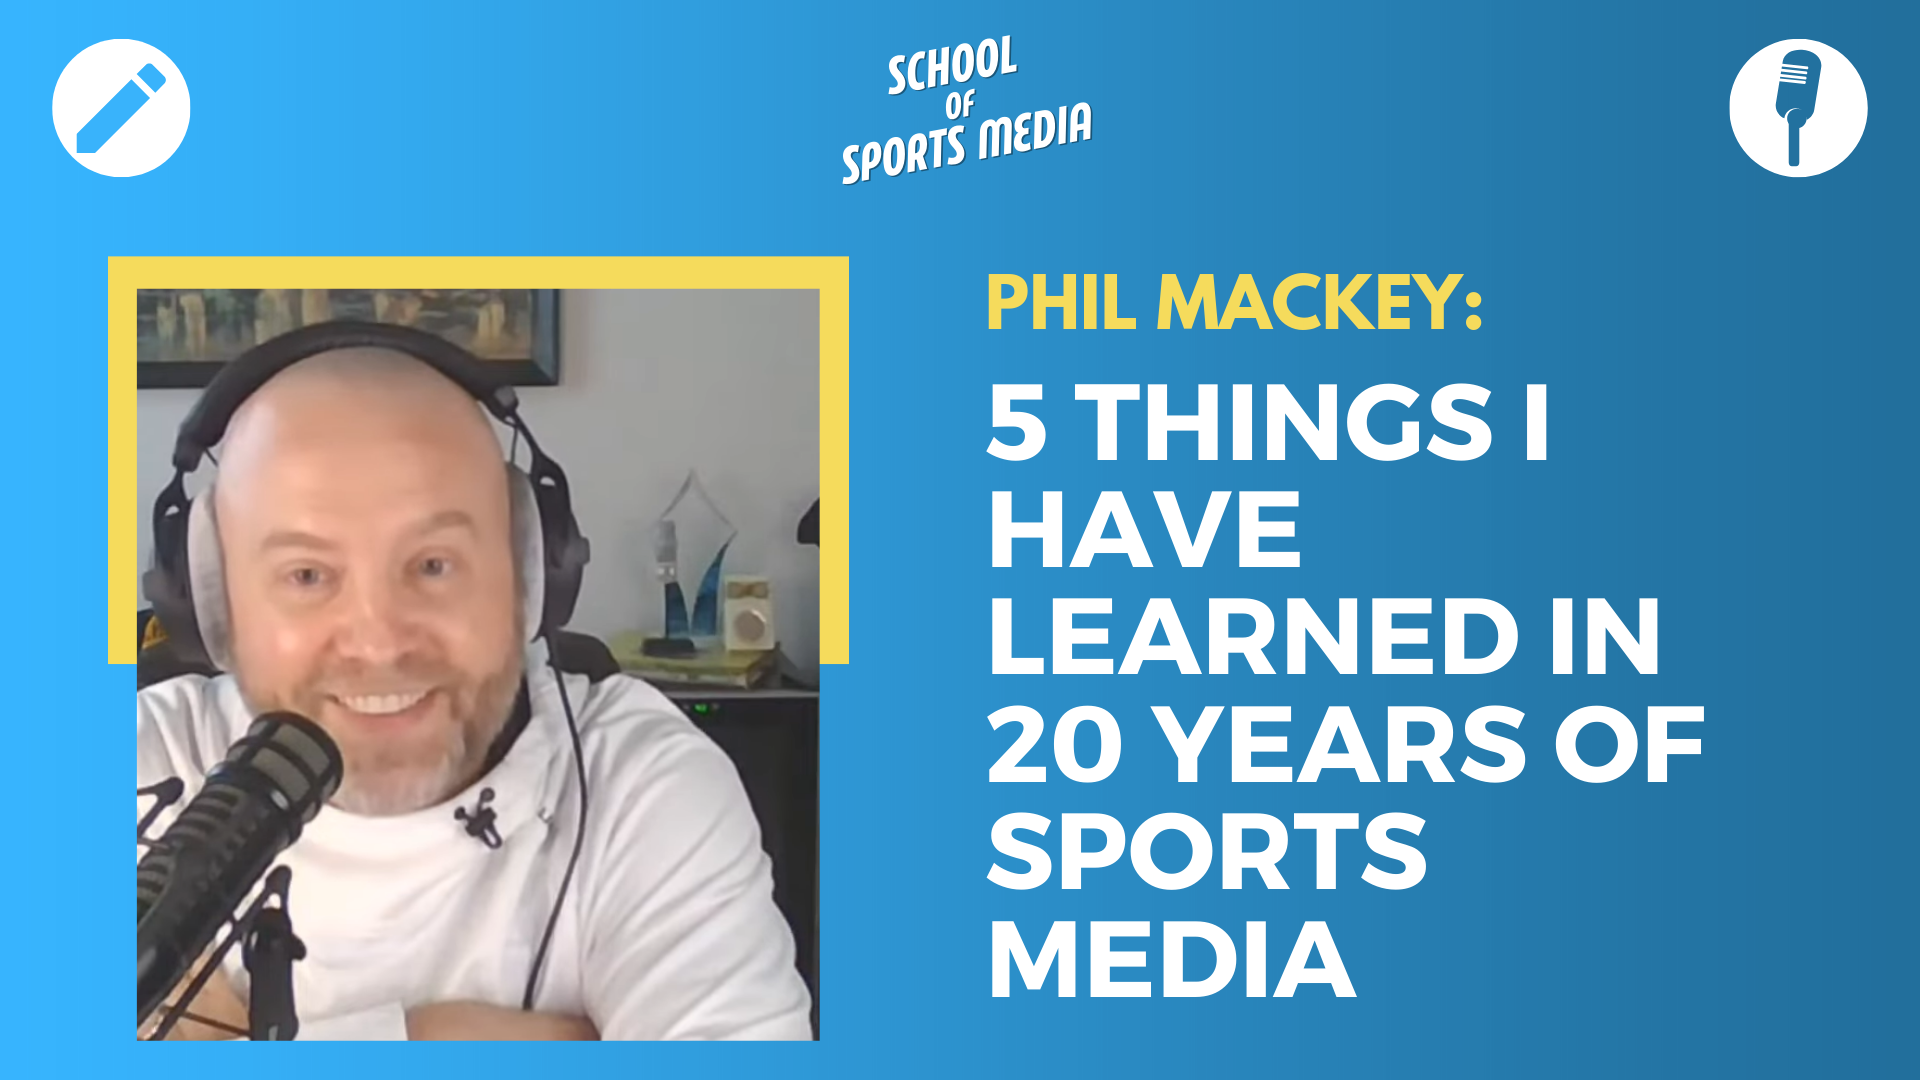 School of Sports Media - 5 Things I Have Learned in 20 Years of Sports Media